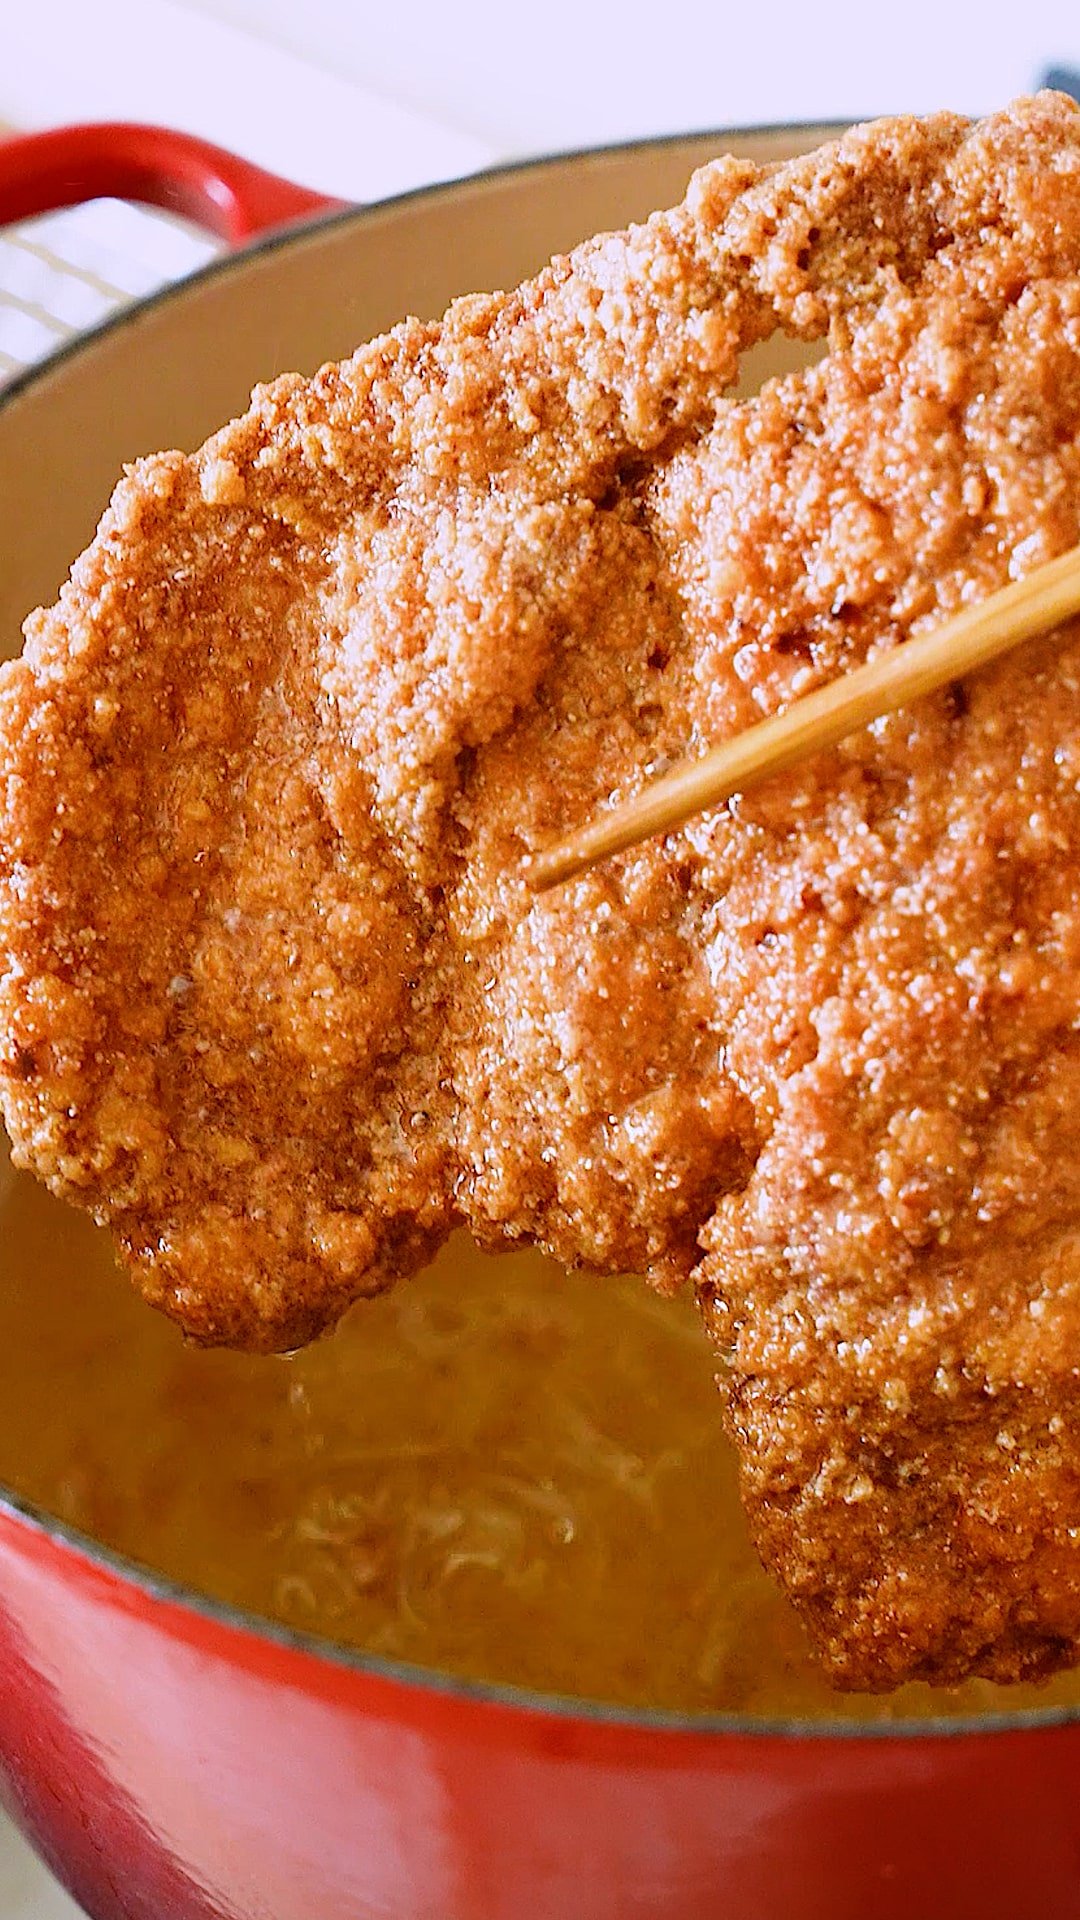 A pair of chopsticks lifting the fried chicken from the oil.